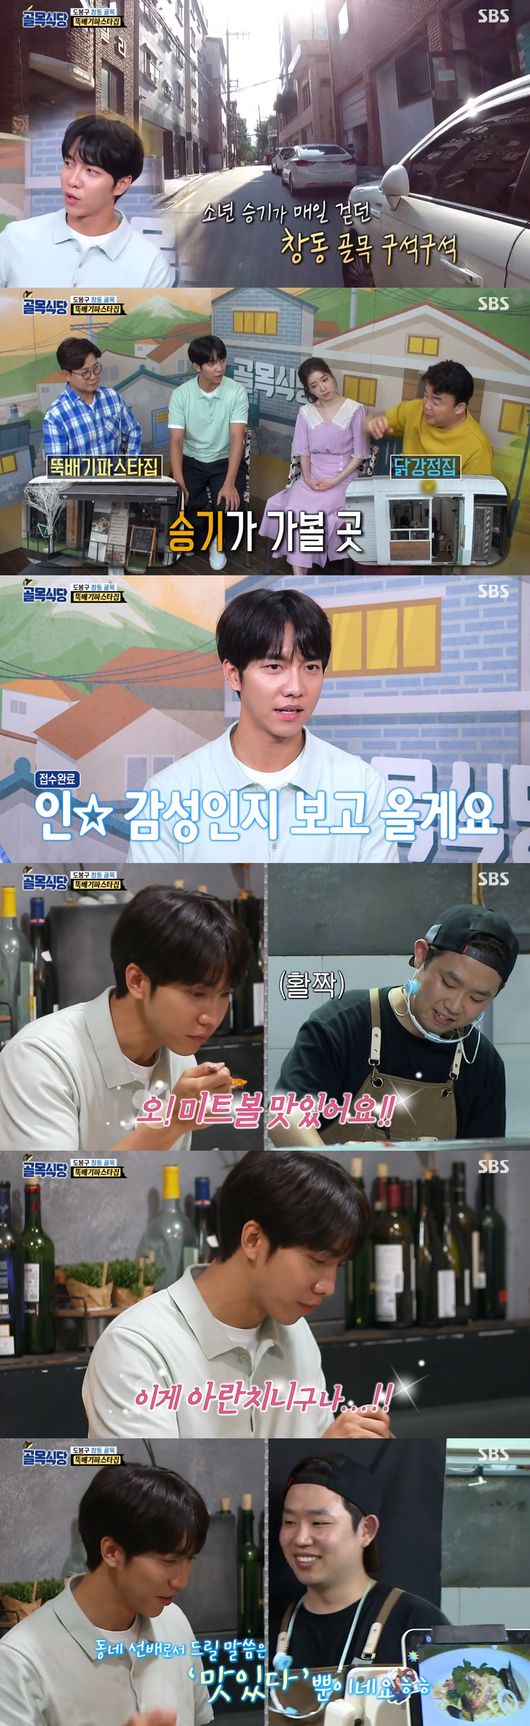 Lee Seung-gi reveals affection for Baek Jong-wonLee Seung-gi, a Chang-dong native, appeared on SBS Baek Jong-wons The Alley Restaurant broadcast on the 19th and started a Pasta house tasting.Earlier in the day, Fabry went to the pizza house and found a Pasta house to improve meatballs. Fabry advised, We should put pigs and small meat in half.He then advised that when making arancini, only flour dough and bread flour can be buried to make it more crispy.After being advised by Fabry, the boss of Pasta House repeatedly practiced. The boss told Baek Jong-won, I tried meatball cream and tomatoes.Arachini also practiced in two ways, Baek Jong-won said, tasting meatball tomato Pasta and Arachini Cream Pasta.It tastes good; it definitely fits well with Cream sauce, said Baek Jong-won, who tasted Arachini.The meatball has definitely been tasty, Baek Jong-won said.But Baek Jong-won said, I like meatball Pasta, he said. I think its a completion, but I think its a completion.Baek Jong-won said there was no visual that could attract peoples attention.The taste is important, but now it should be uploaded to SNS, said Baek Jong-won. The taste of sauce is completed. I think we should study meatballs.On that day, Baek Jong-won said he had invited a guest; Baek Jong-won said, I am a very difficult person to get out of, but I came out to save the neighborhood.It was Lee Seung-gi, who said, I had to come in a little bit, but I came out too soon, I wanted to come once.Kim Seong-ju said, If you do not know Lee Seung-gi in Dobong-gu, you are a spy.Lee Seung-gi said, I lived in Suyuri, went to elementary school in Banghak-dong, and lived in Chang-dong until I debuted. I thought about it when I walked here.Lee Seung-gi then said, I admired Mr. Baek Jong-won so much that I wanted to be invited to the house once.I said that the two-way type would connect in the middle, but it was canceled. I thought back in the day when I said I was filming in Chang-dong, its the way I rode my bike, Lee Seung-gi said.We have to go to two places today - Pasta and chicken gangsters, said Baek Jong-won.Lee Seung-gi heard about Arrancini and laughed, saying, I made it for children in Little Forest and I hated it.On the other hand, Lee Seung-gi visited Pastas house and sampled Mitball Pasta and Arrancini Pasta.Lee Seung-gi said, I always talk about the problem, he said.: SBS Baek Jong-wons The Alley Restaurant broadcast capture